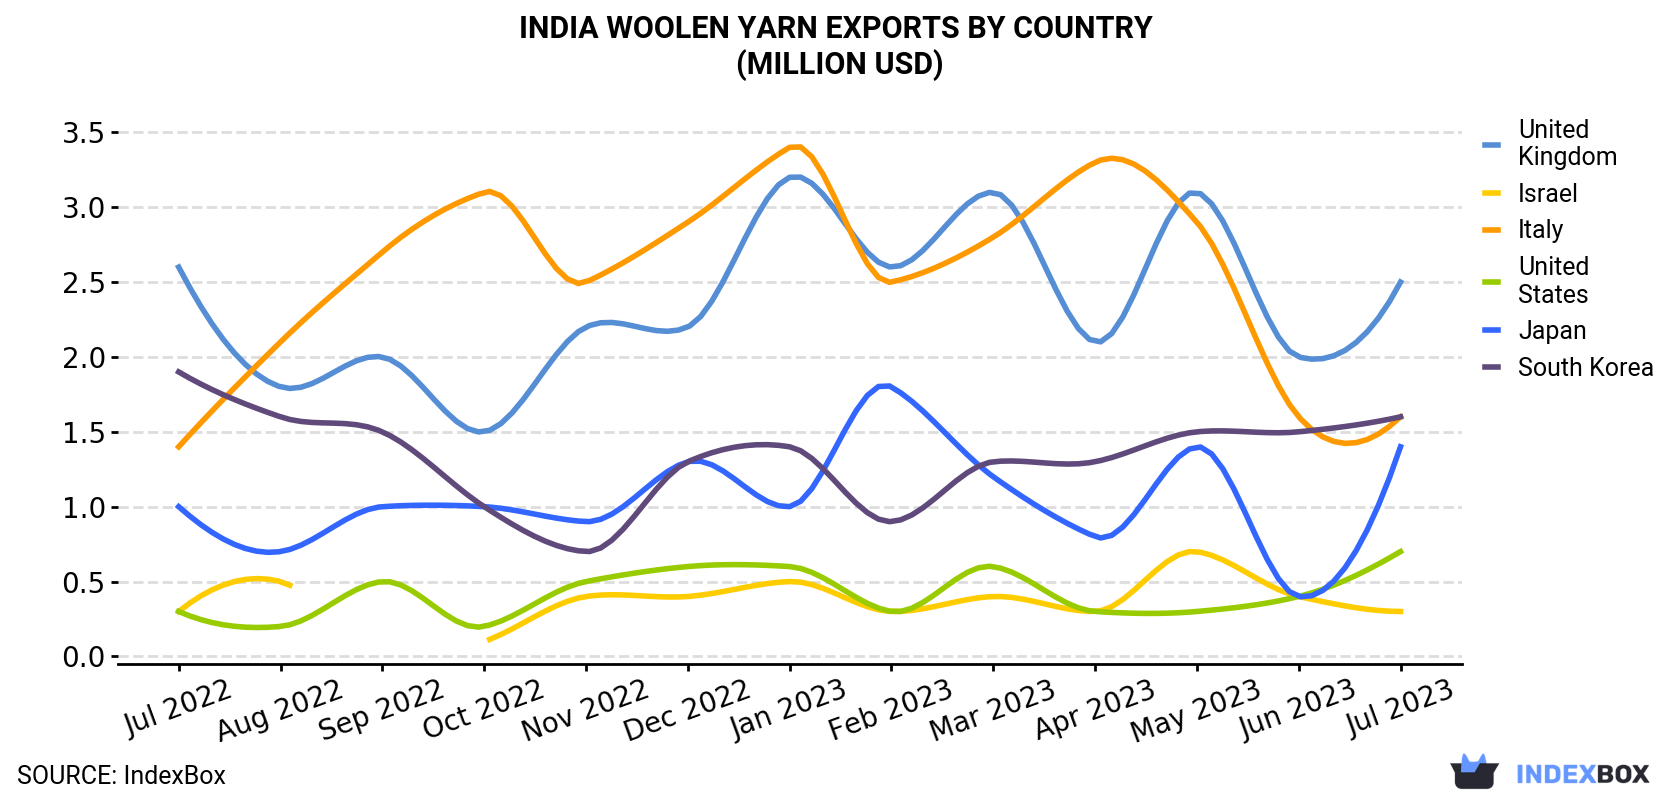 India Woolen Yarn Exports By Country (Million USD)